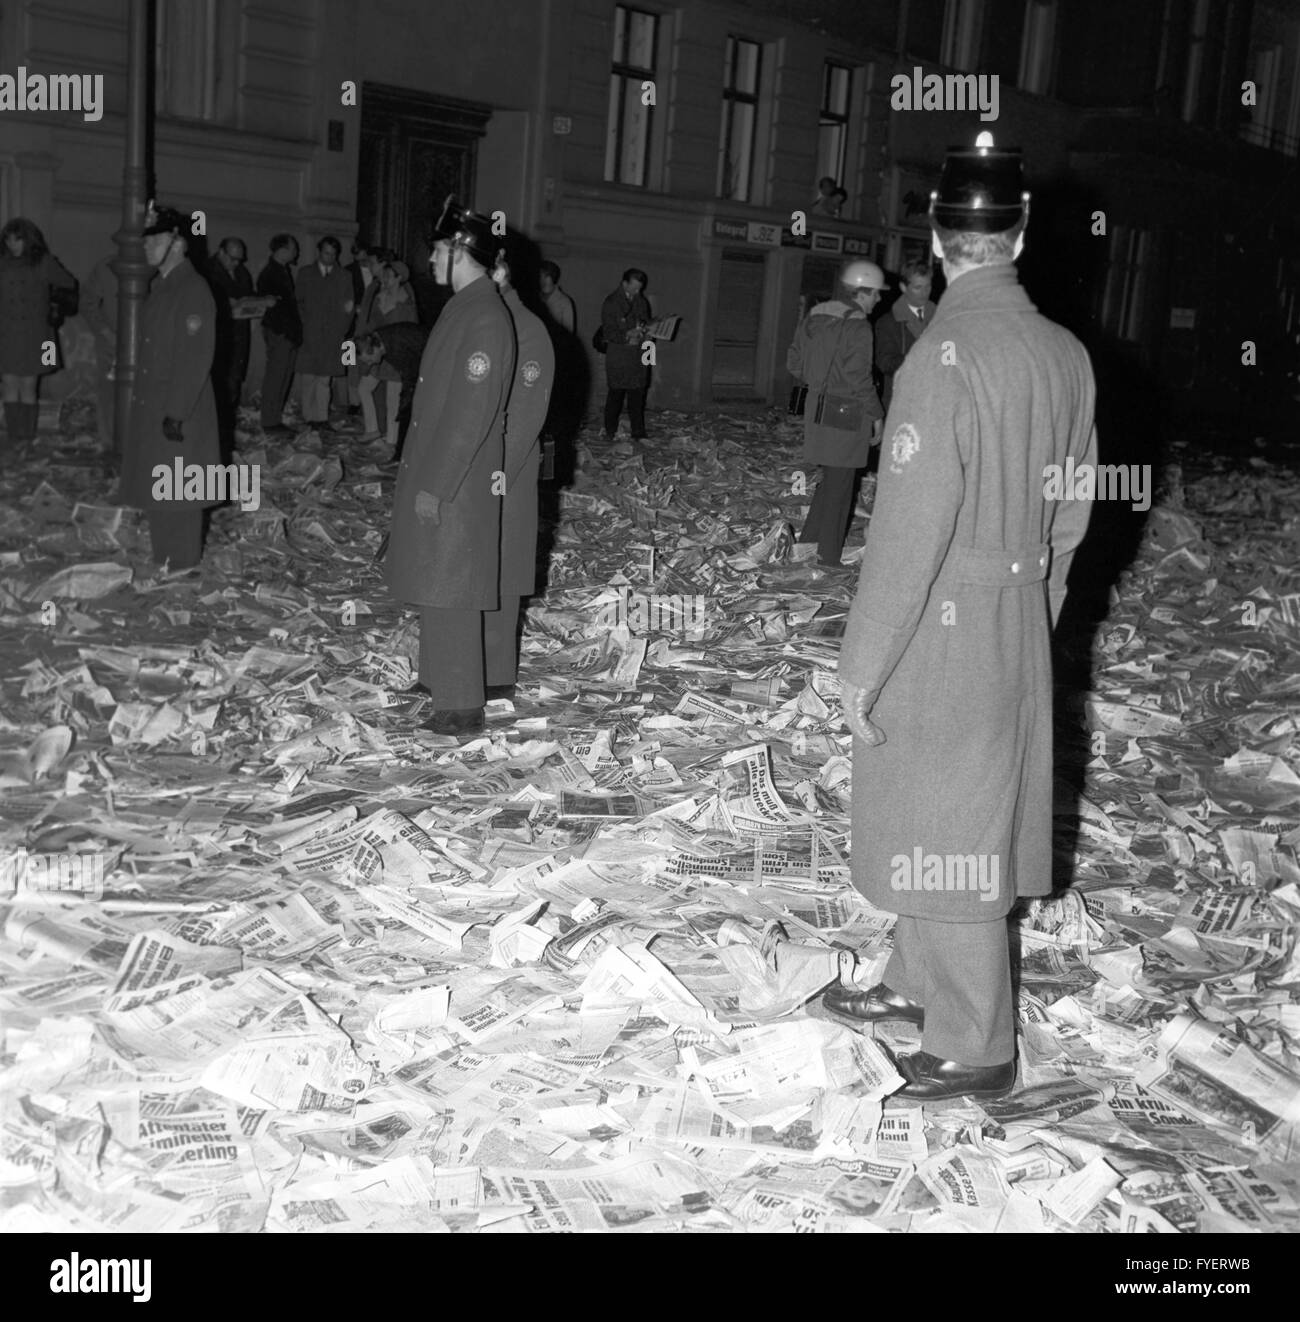 Police on 13 April 1968 in the middle of newspapers by Springer Media Group lying on the ground after protesters had cleared a delivery van to protest the assasination attempt on student spokesperson Rudi Dutschke. Stock Photo